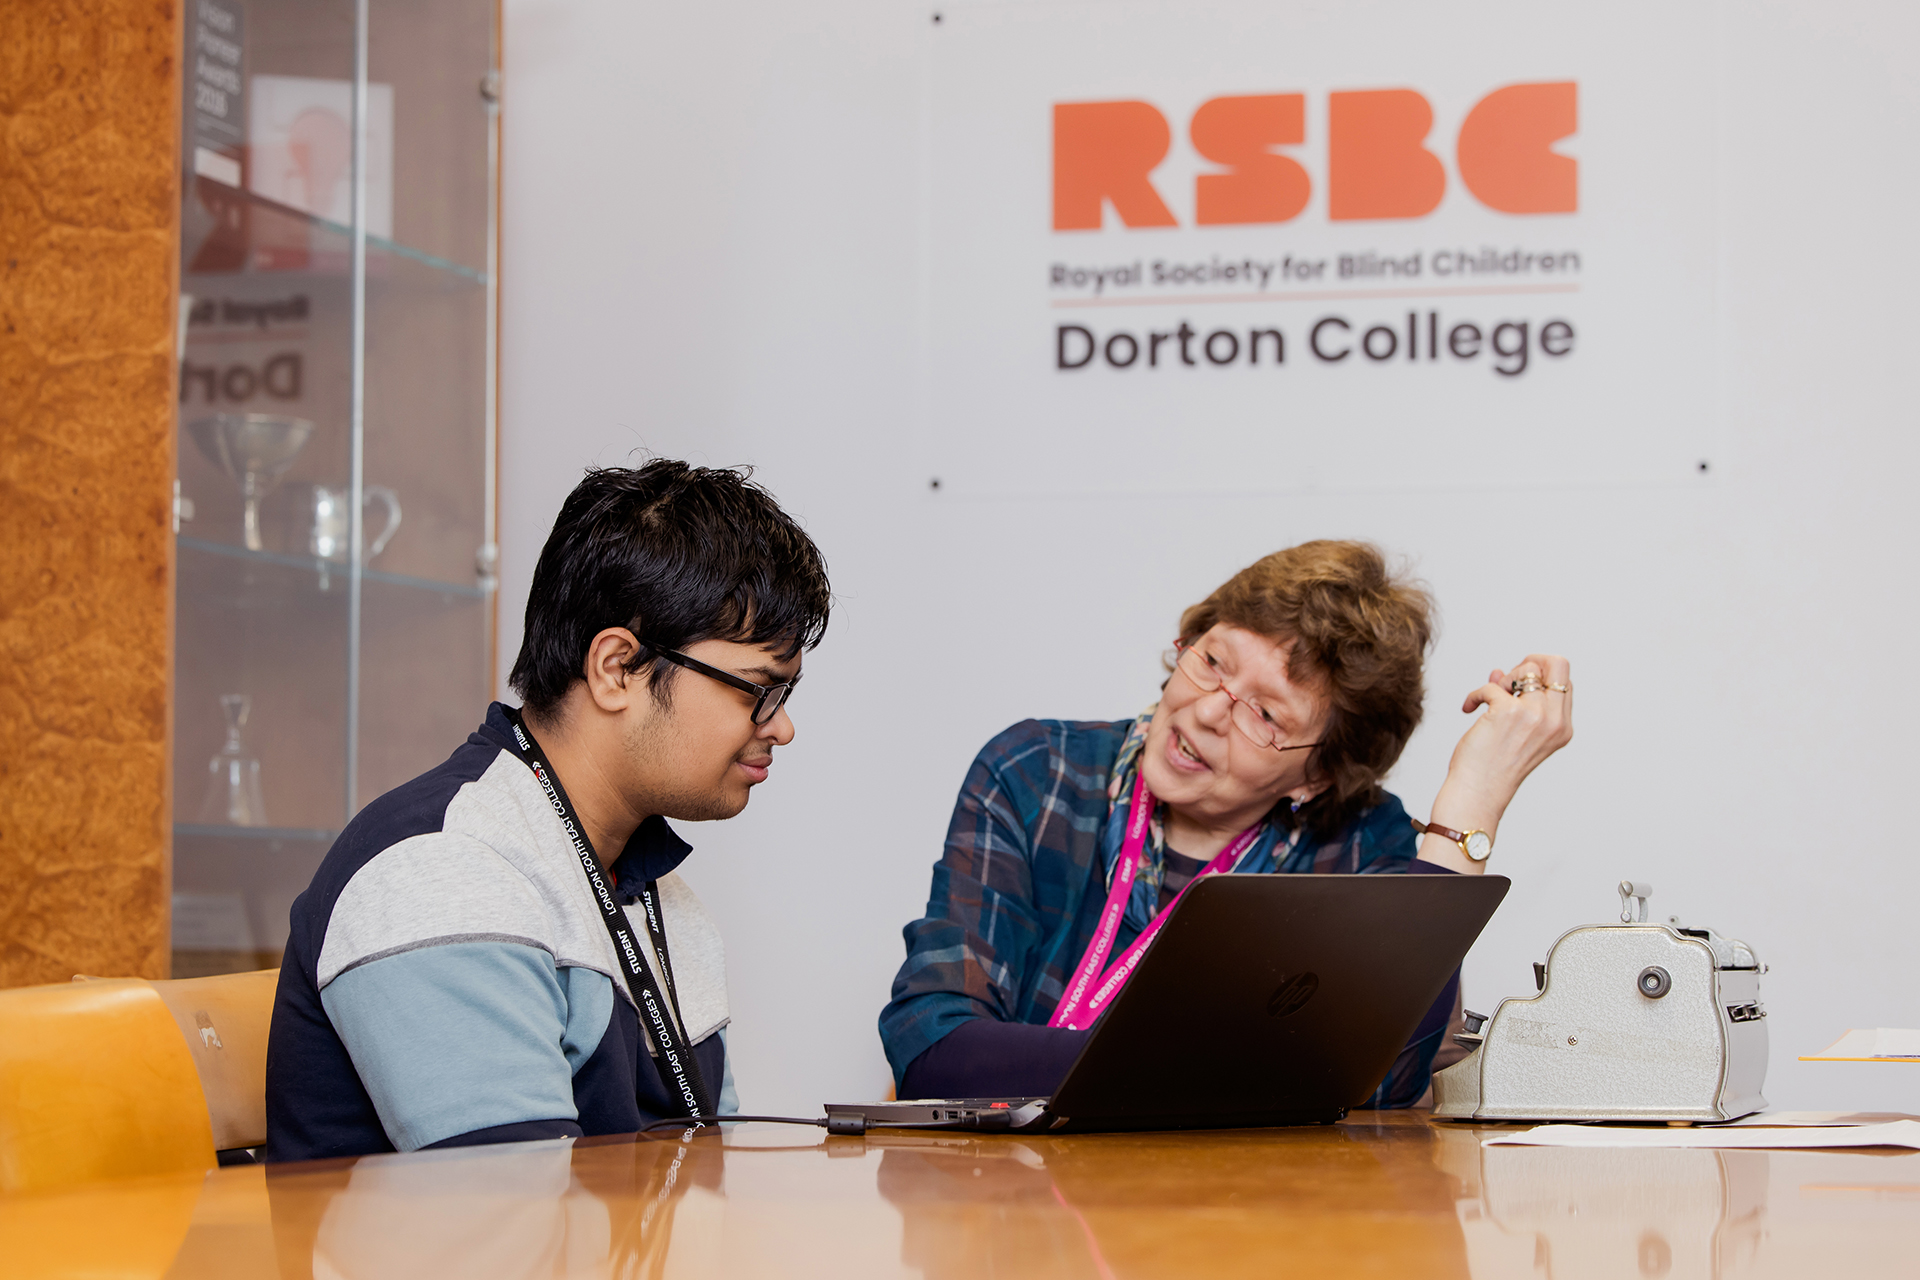 A male student, with glasses, sat down with a female tutor at a desk, listening to her explaining something to him. Behind them on the white wall is an orange RSBC logo with the words Dorton College underneath it.